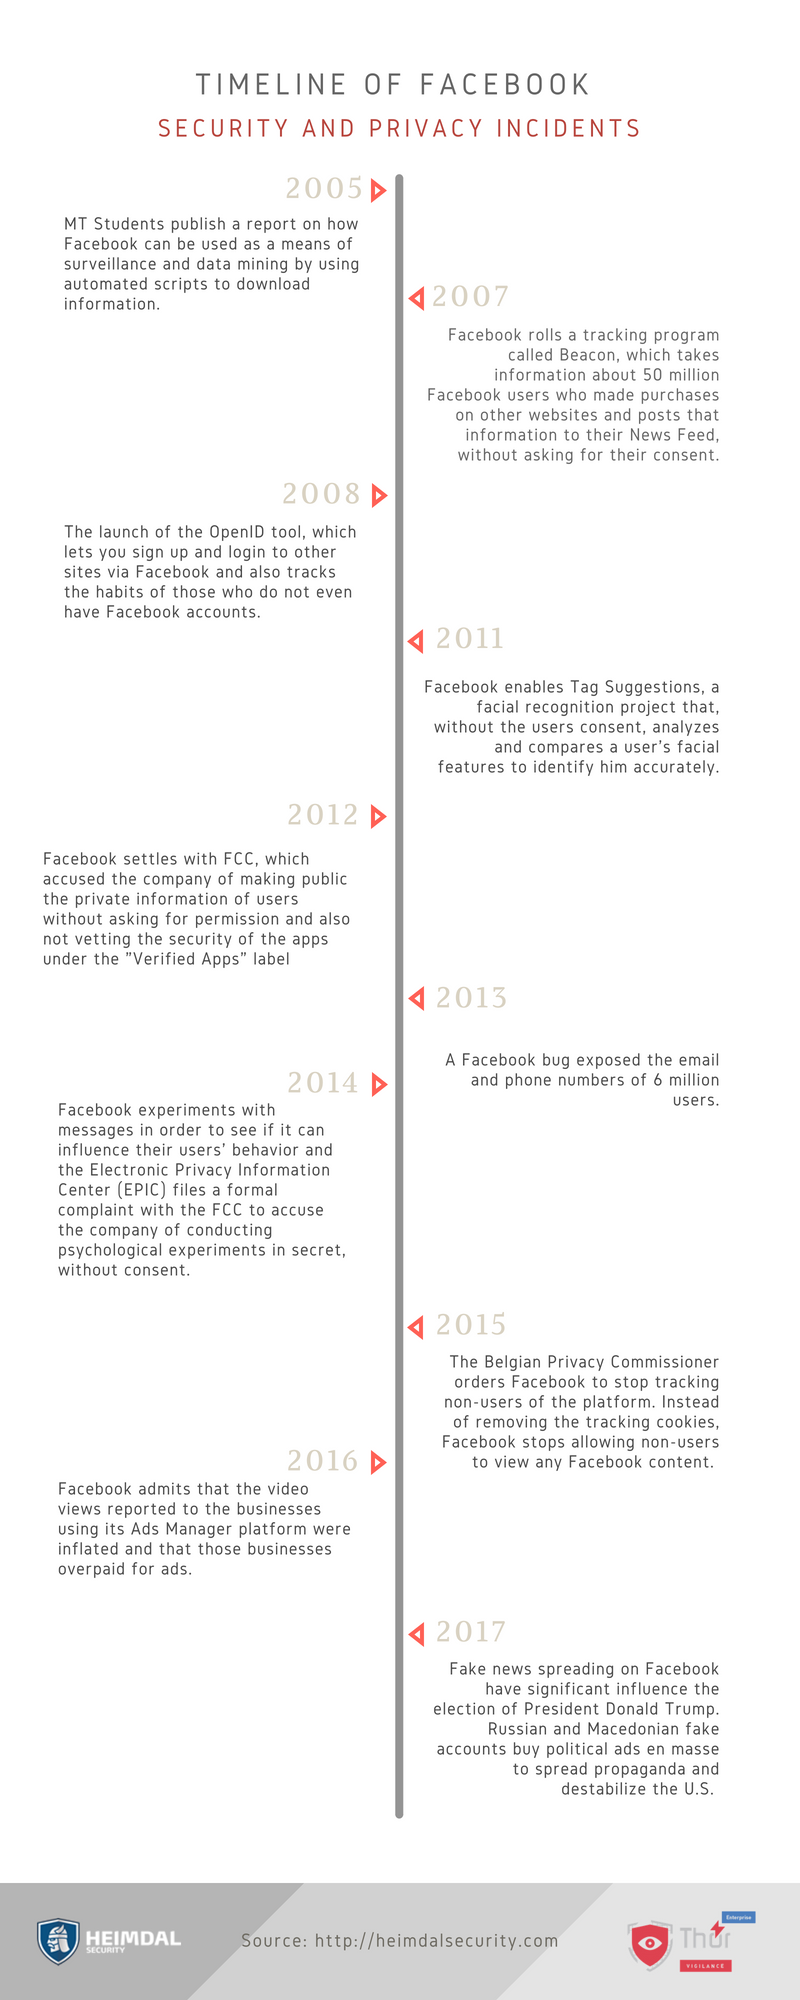 facebook timeline of privacy breaches and incidents